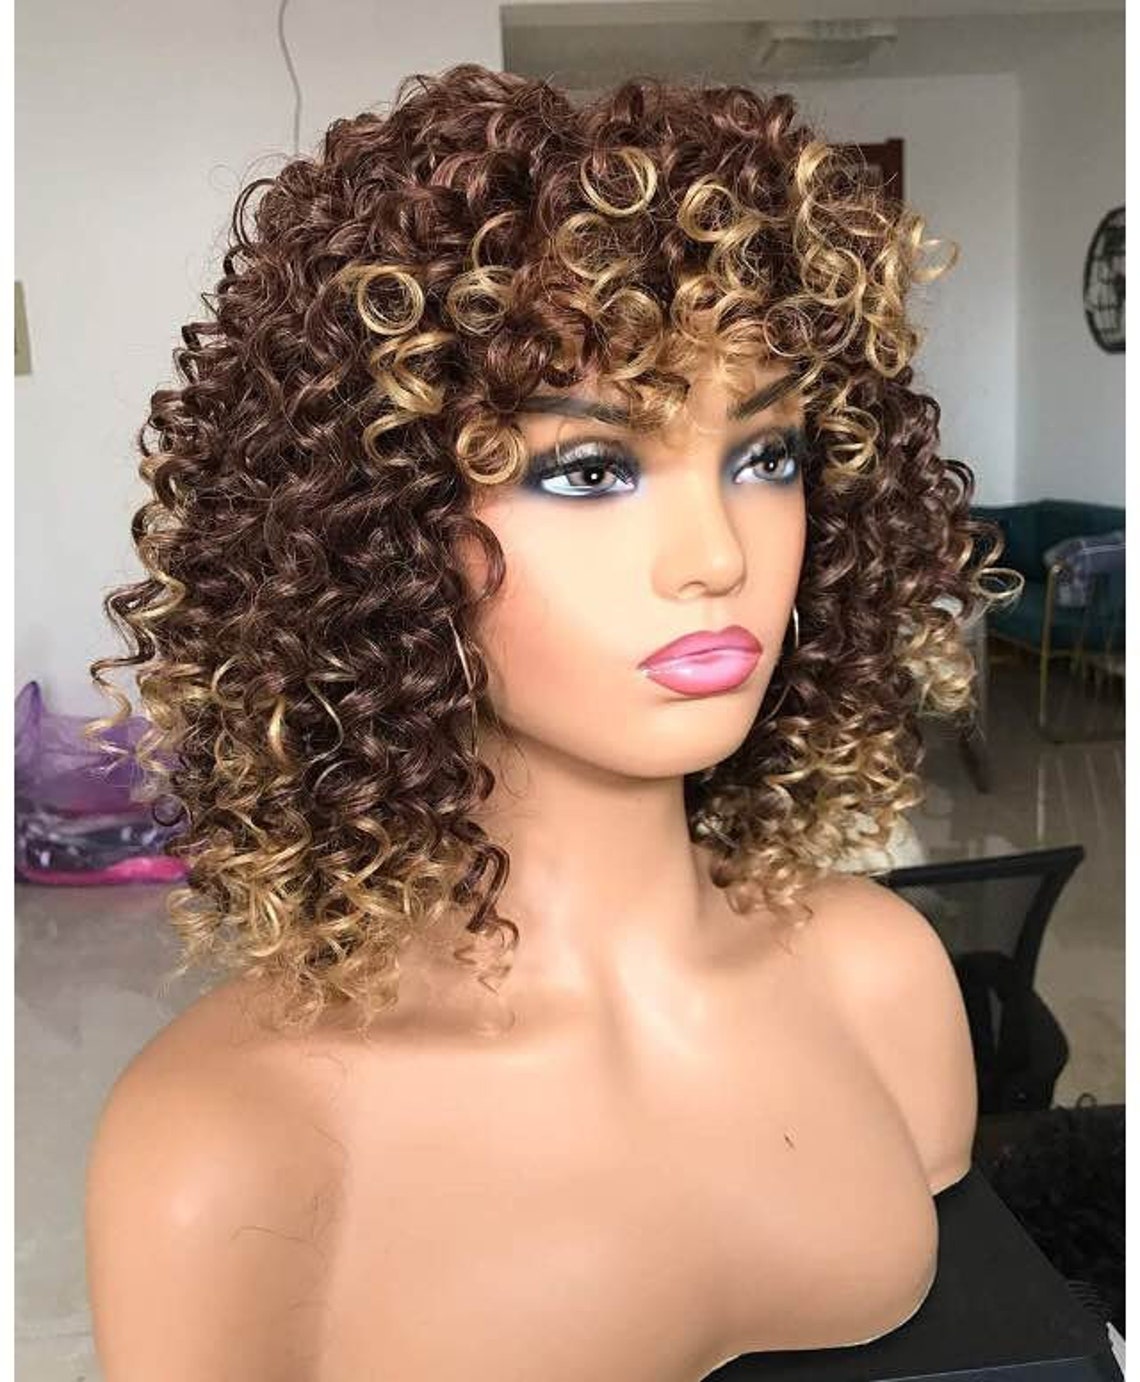 Afro curly Wigs Ombre Blonde Wig with Bangs Natural Looking | Etsy